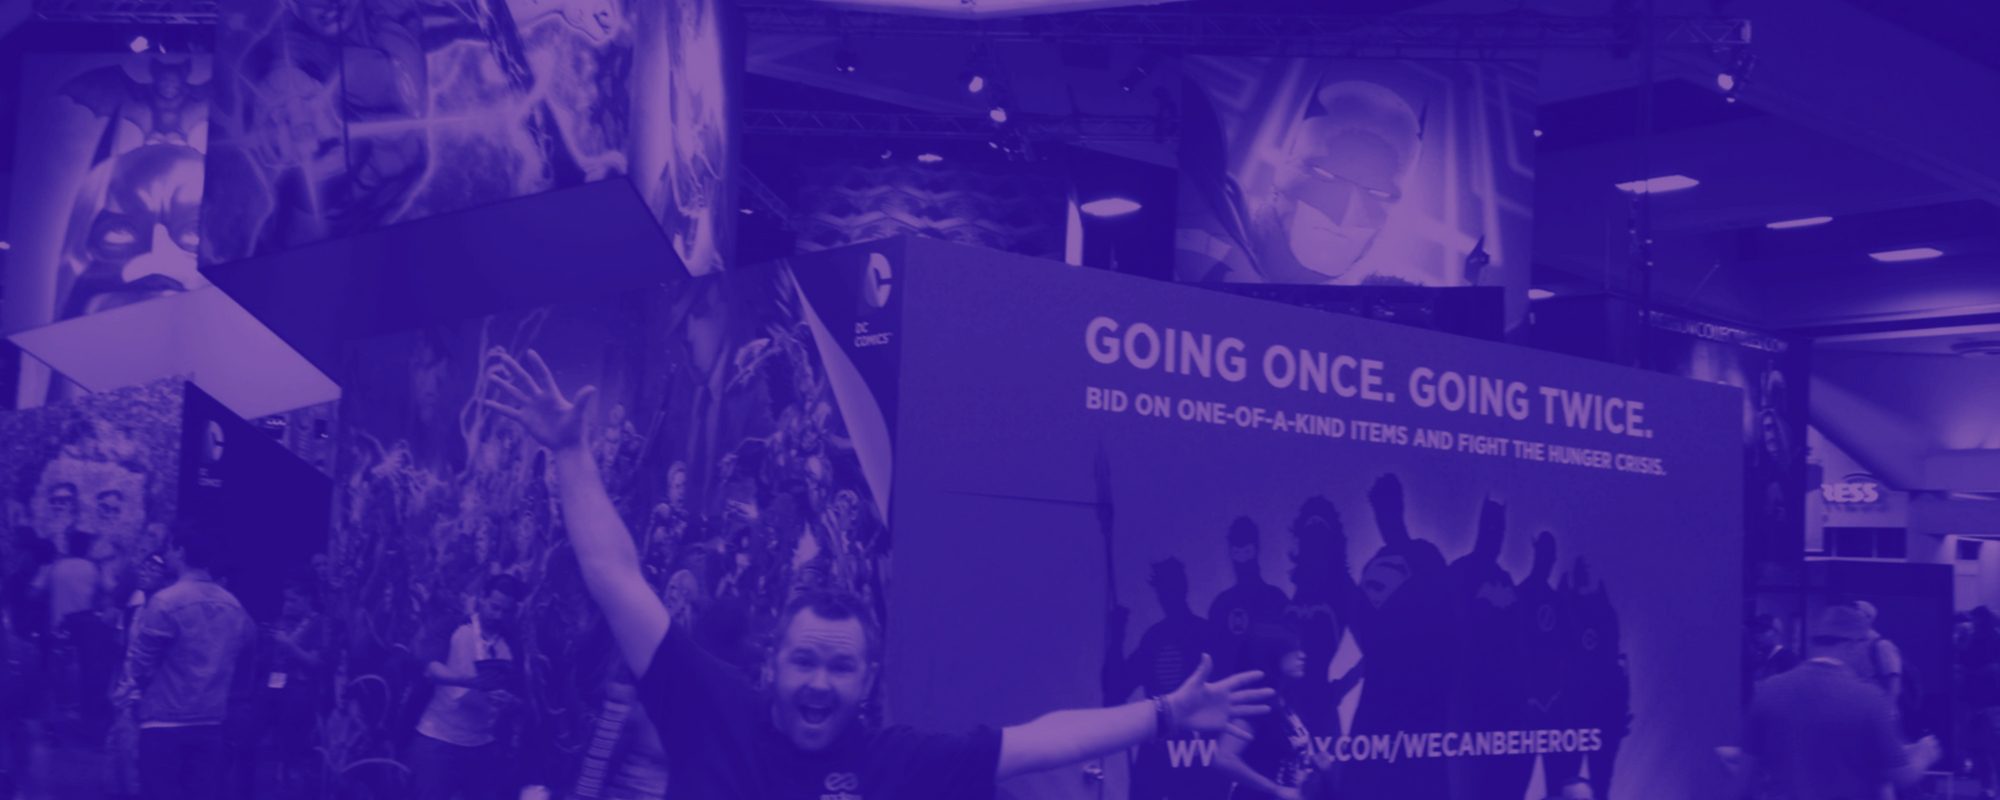 How To Create The Best Trade Show Booth – #EventIcons Episode 67